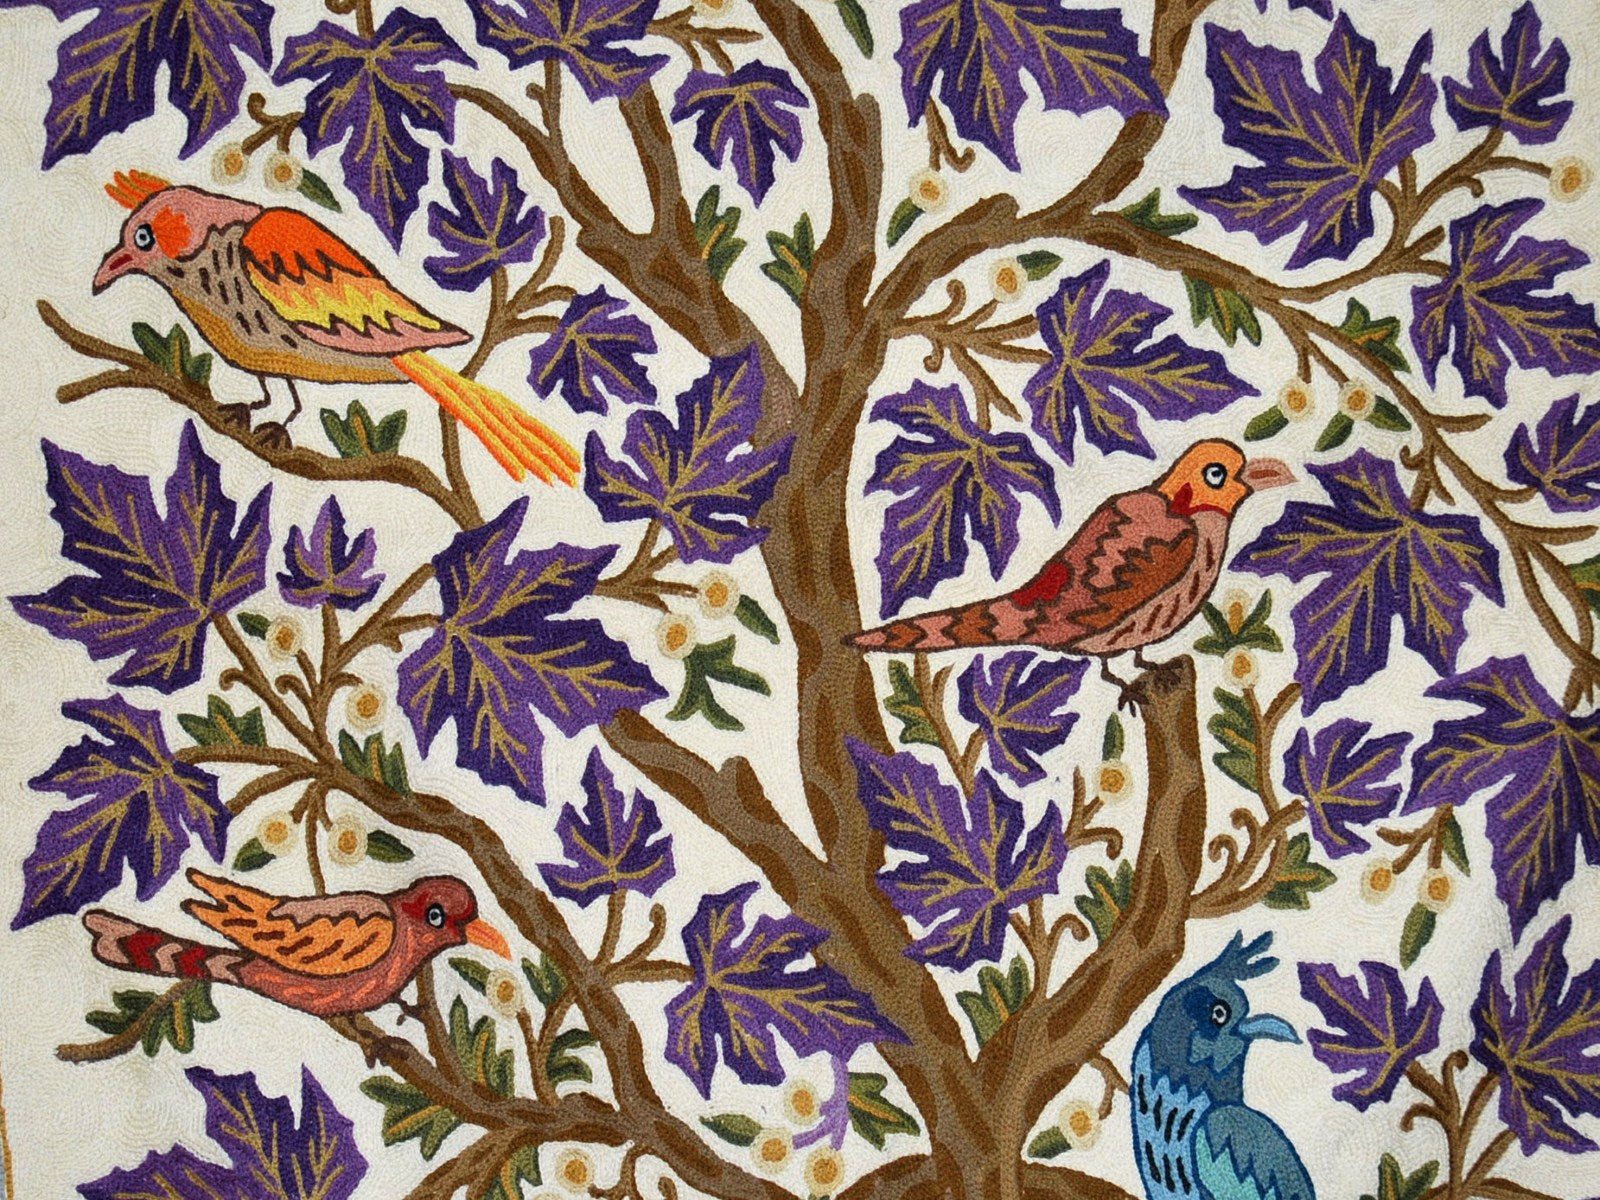 Kashmiri Wool Tapestry Area Rug "Tree of Life Birds", Multicolor Wool Embroidery 3x5 feet #CWR15131